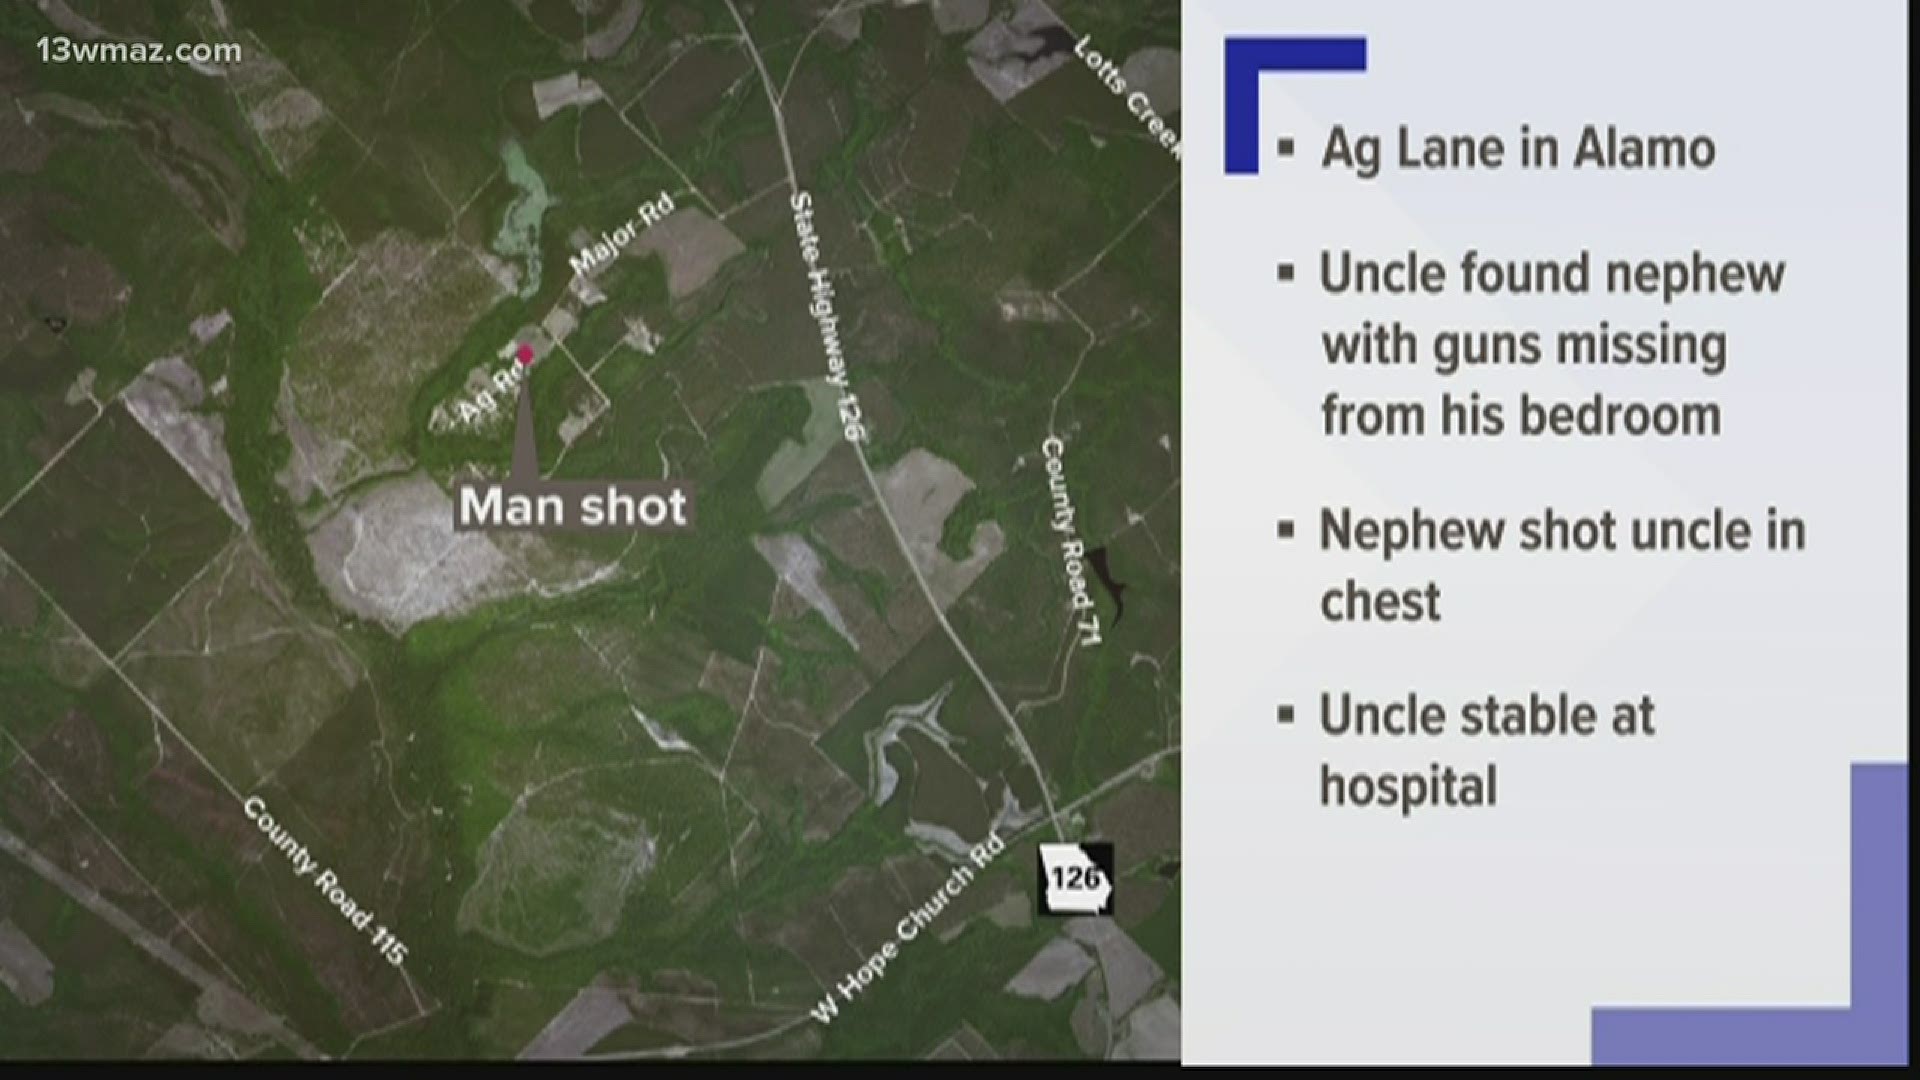 A teen is accused of shooting his uncle in the chest, according to the GBI's Eastman office.